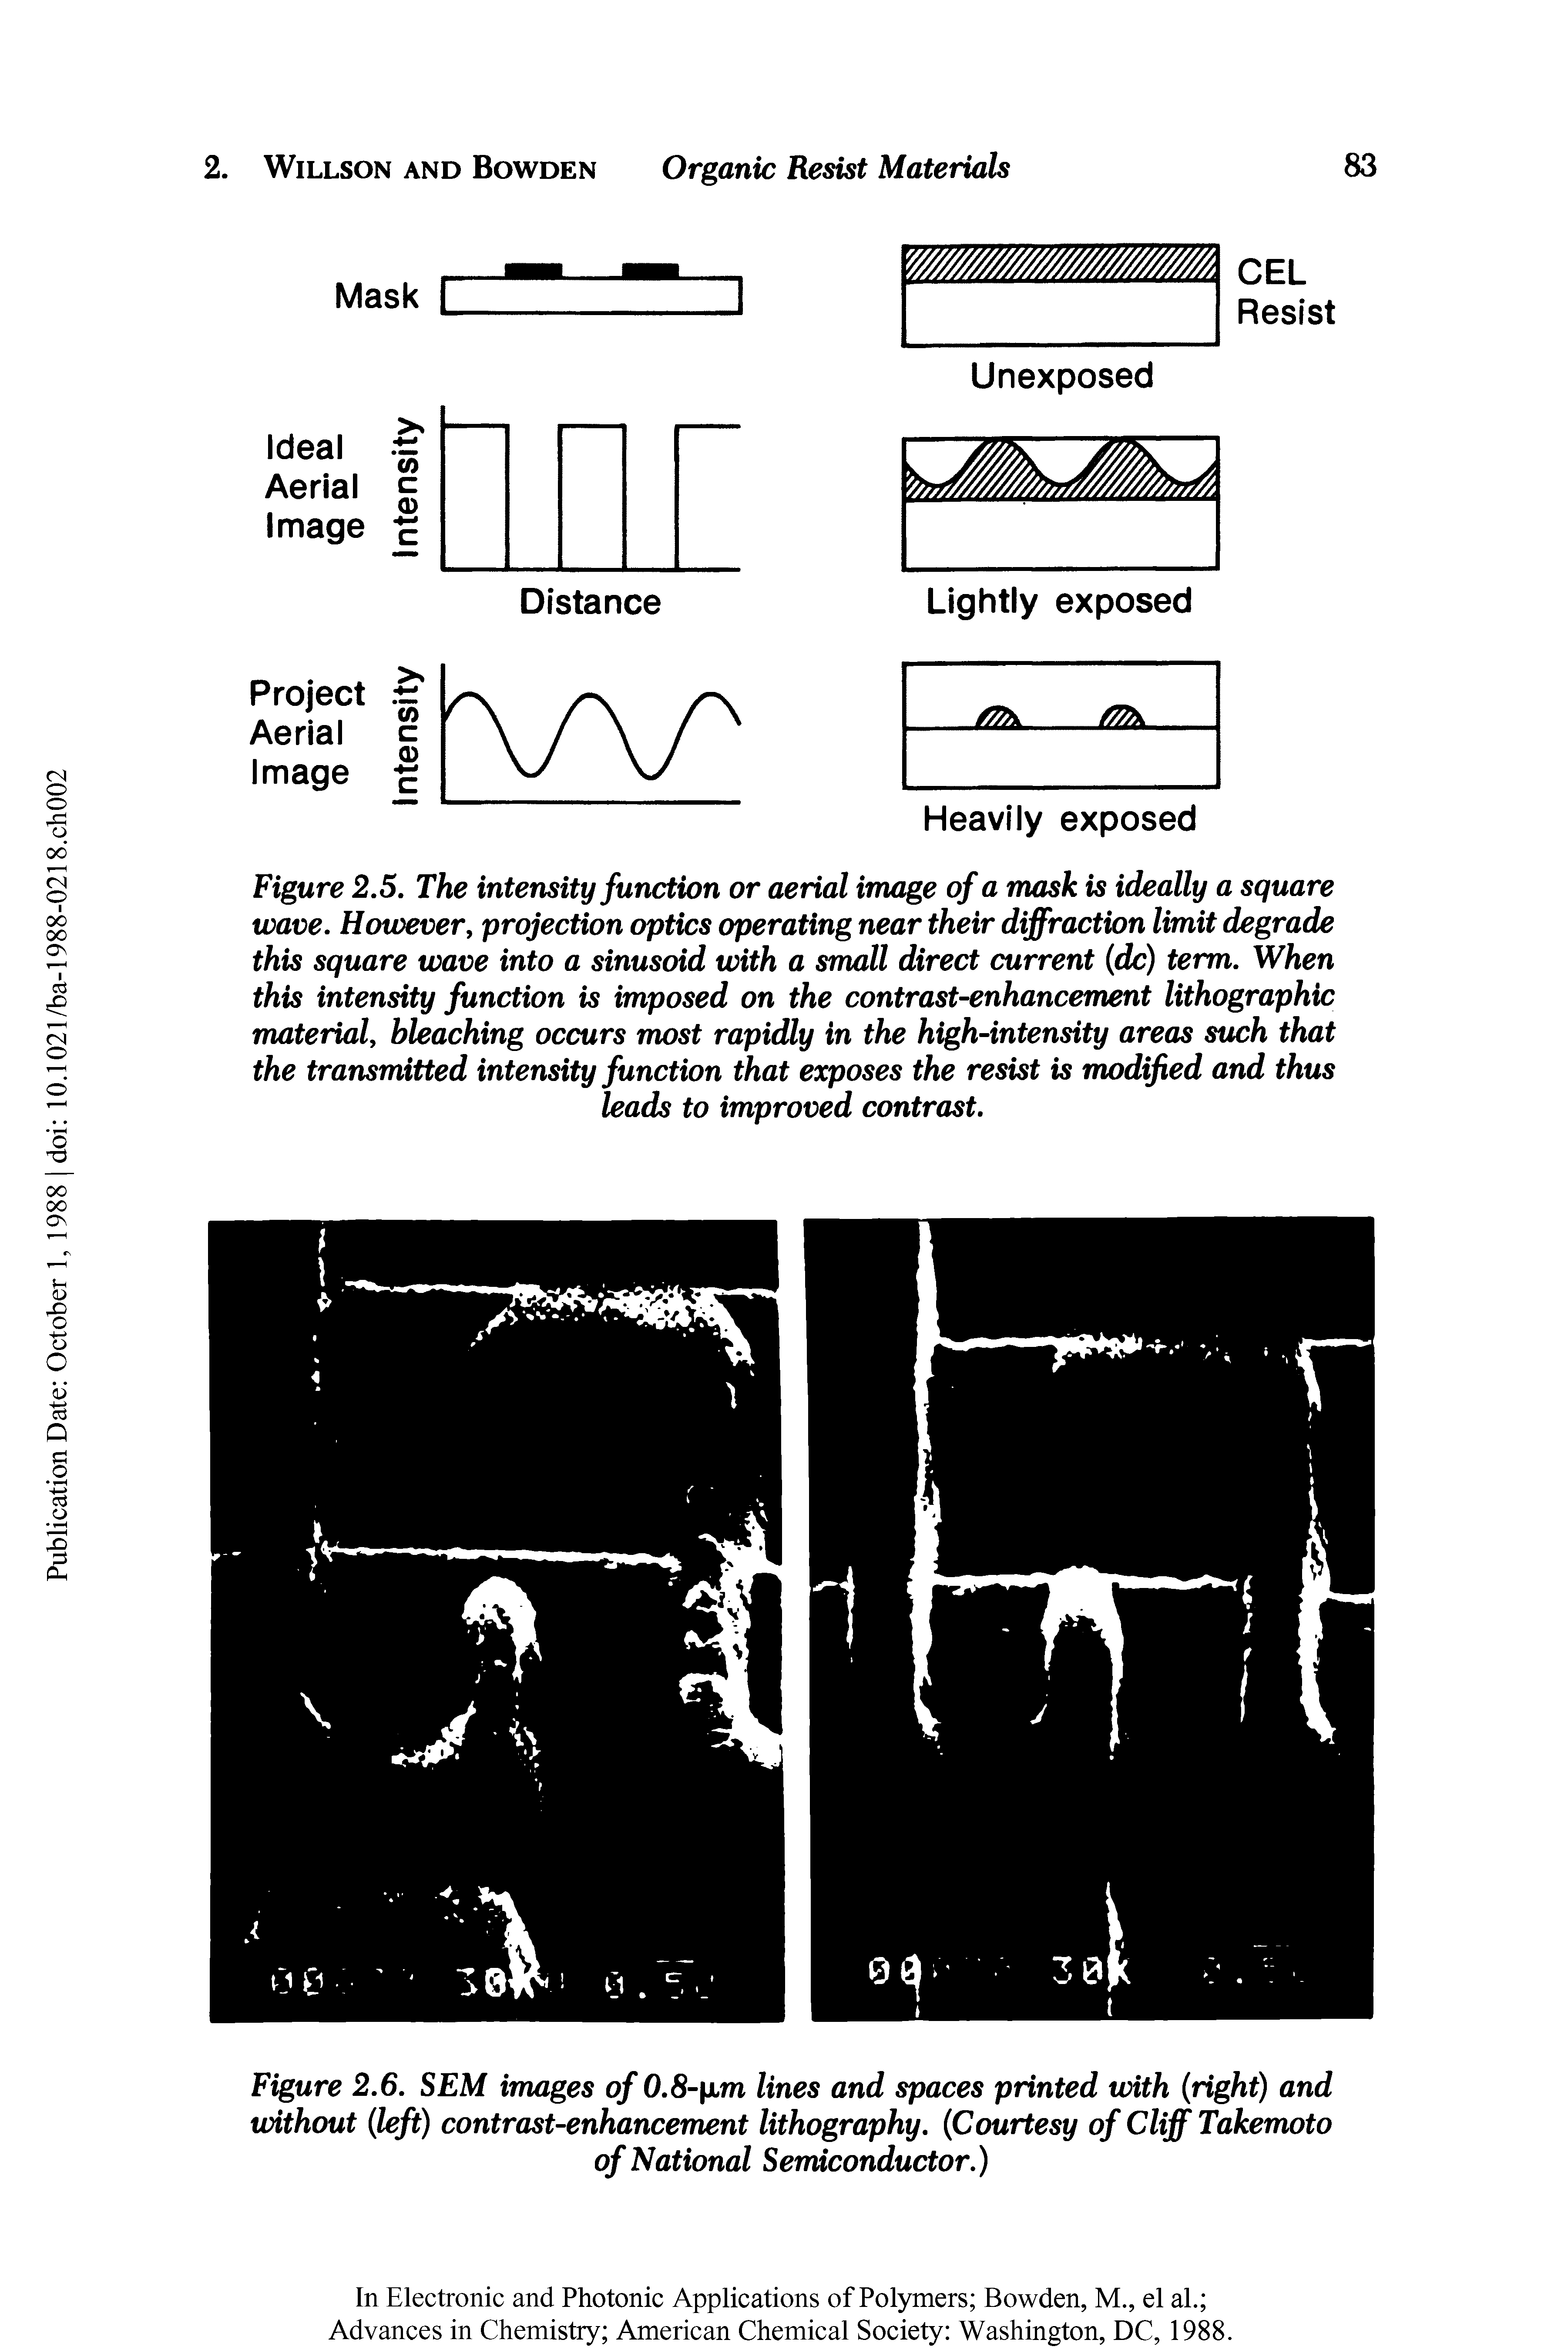 Figure 2.5. The intensity function or aerial image of a mask is ideally a square wave. However, projection optics operating near their diffraction limit degrade this square wave into a sinusoid with a small direct current dc) term. When this intensity function is imposed on the contrast-enhancement lithographic material, bleaching occurs most rapidly in the high-intensity areas such that the transmitted intensity function that exposes the resist is modified and thus leads to improved contrast.